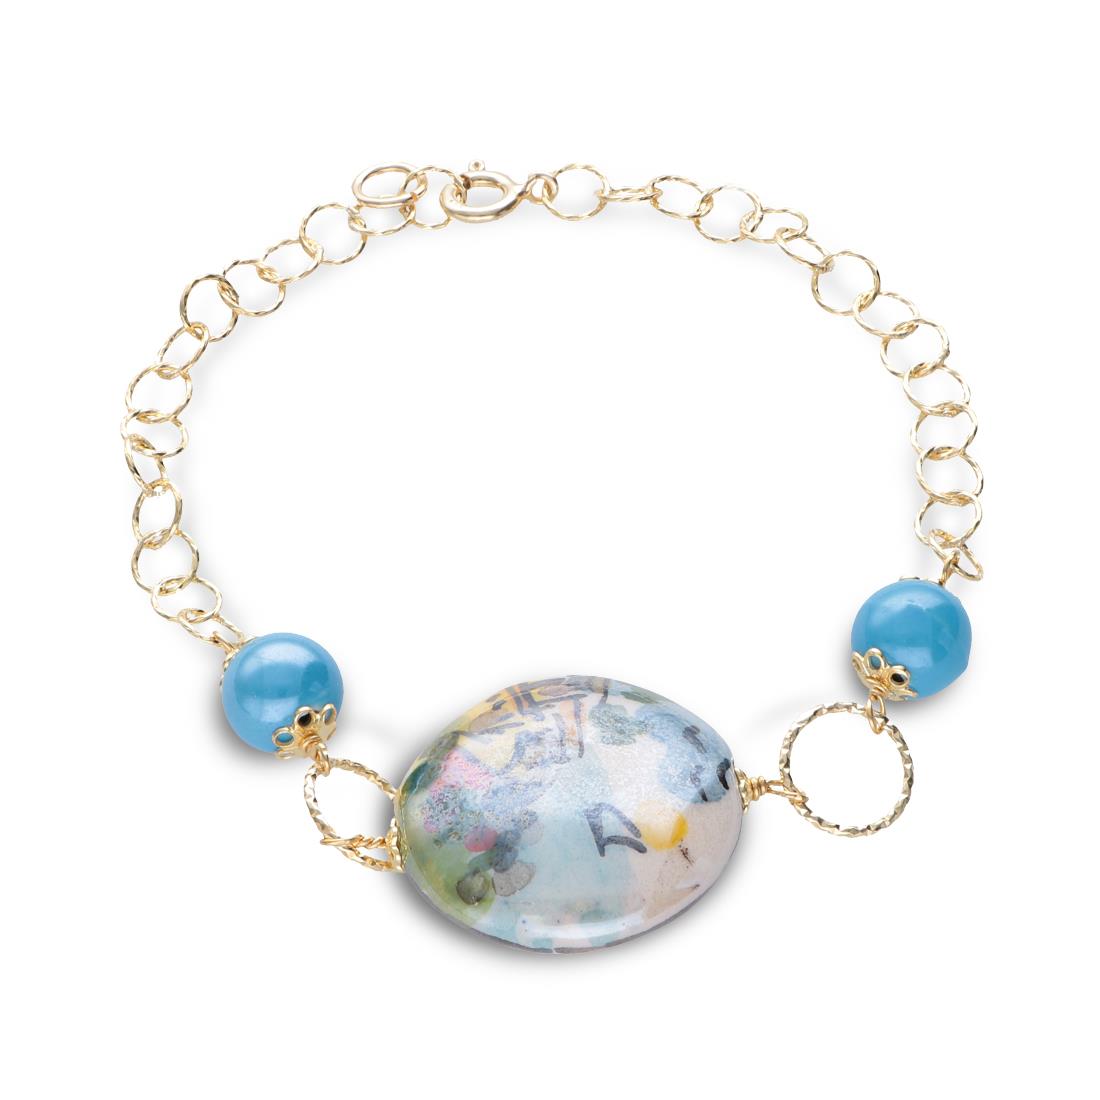 Ceramic bracelet with gilded silver and ceramic with landscape and sea - LE PERLE DI CALTAGIRONE